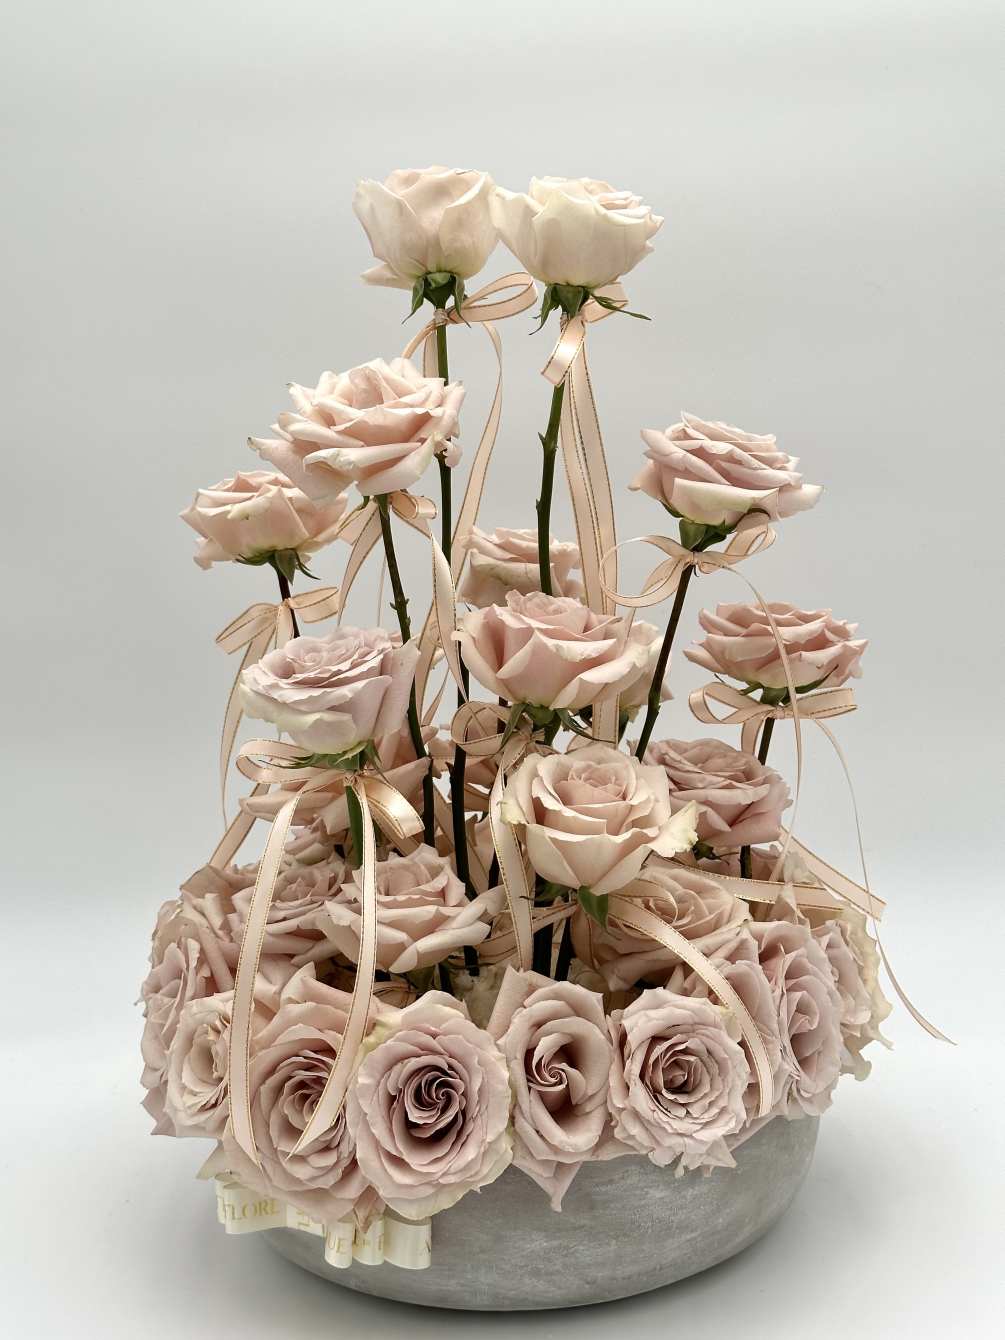 Introducing the &#039;Neutral Elegance&#039; Rose Arrangement&mdash;an embodiment of understated beauty and sophistication.